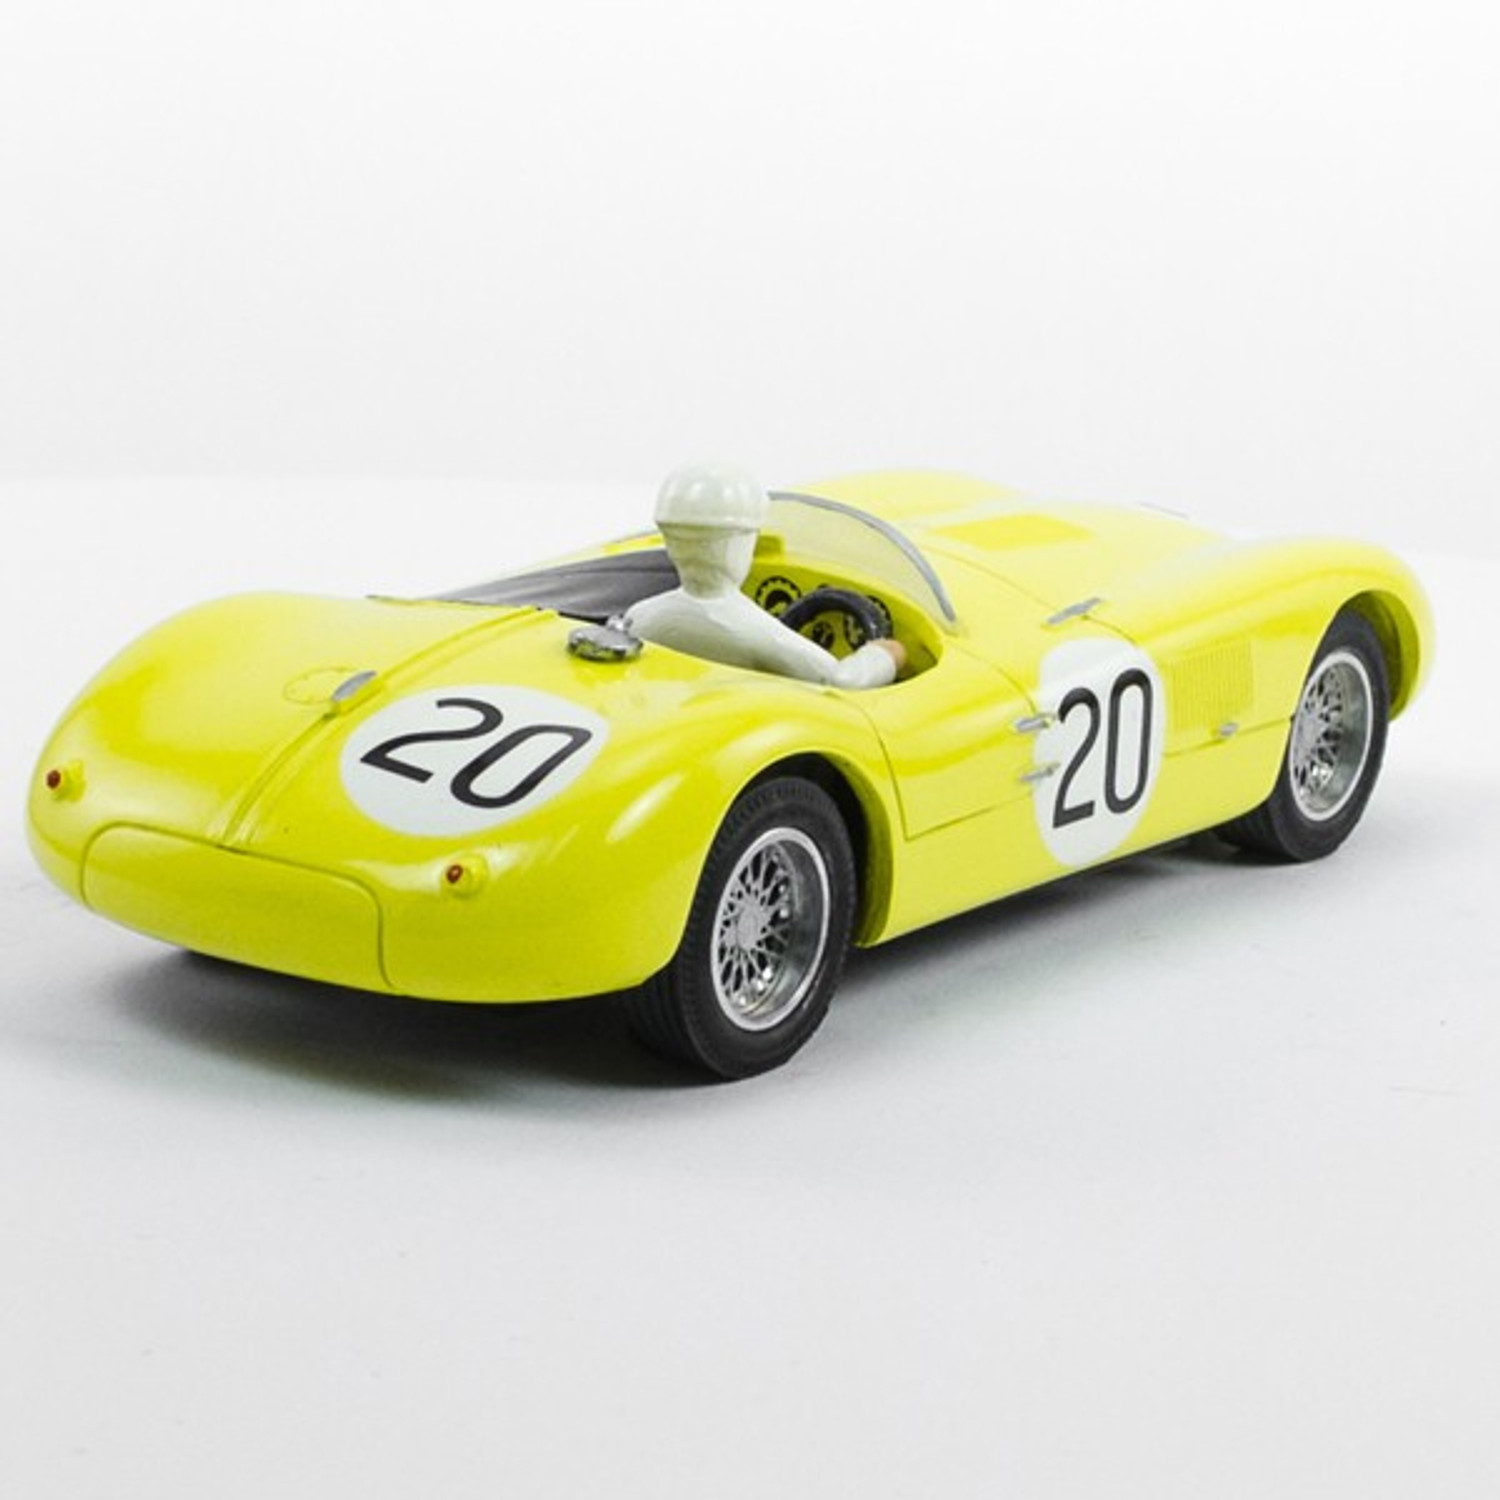 Stock Number: 16233 -Yellow Open Top Number 20 Car by Unknown